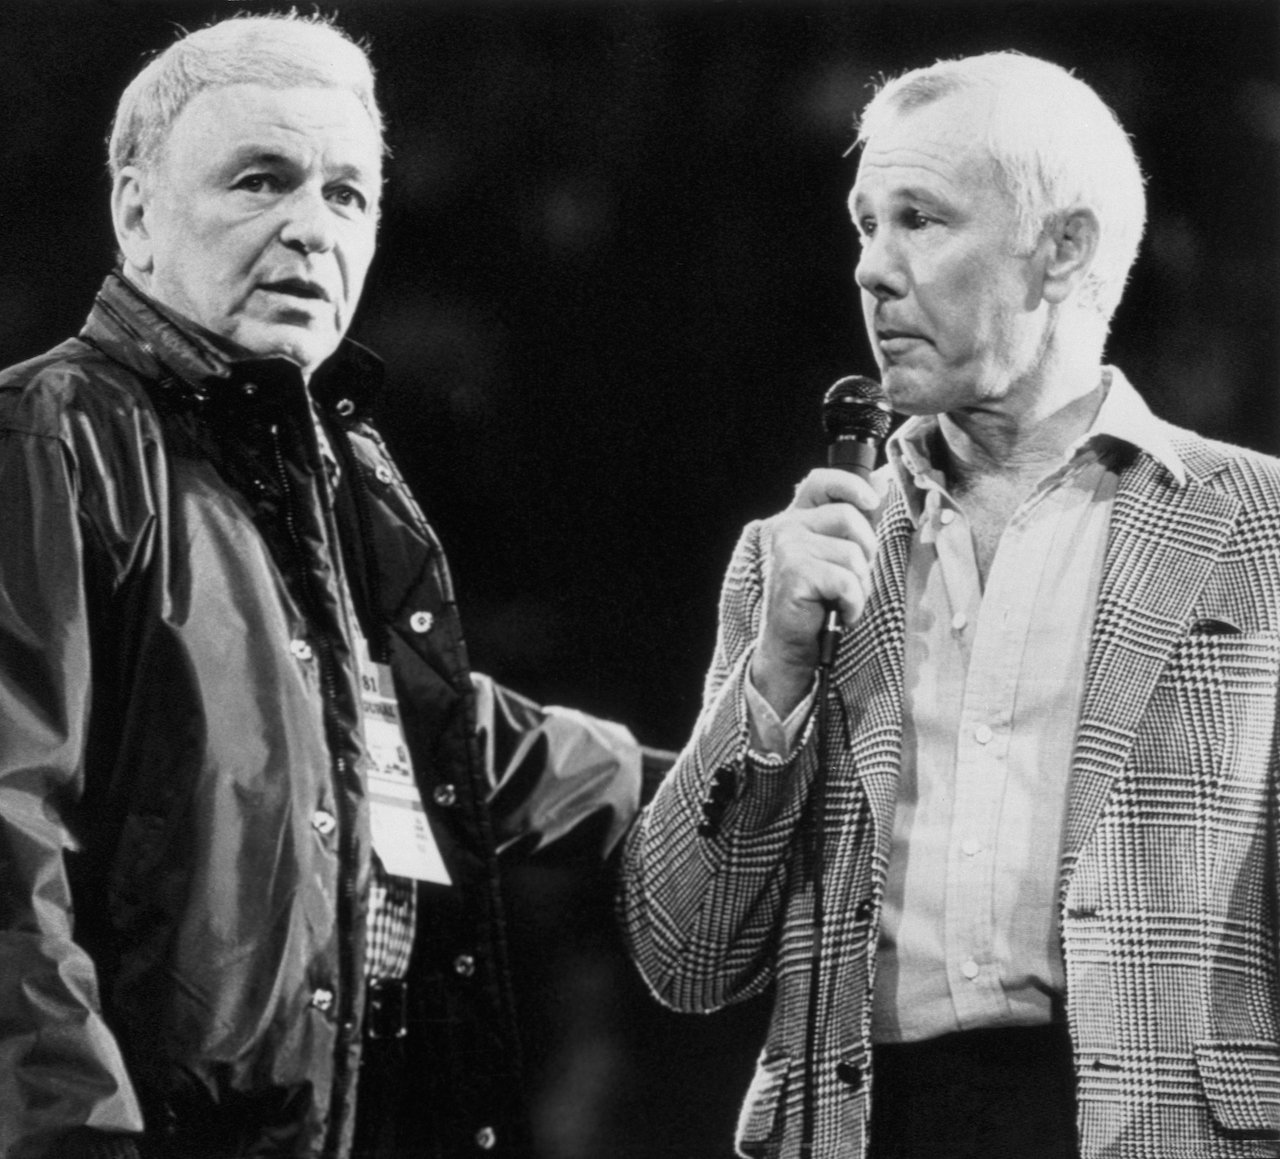 Frank Sinatra in a windbreaker and standing beside Johnny Carson, whose in a plaid jacket and holding a microphone.